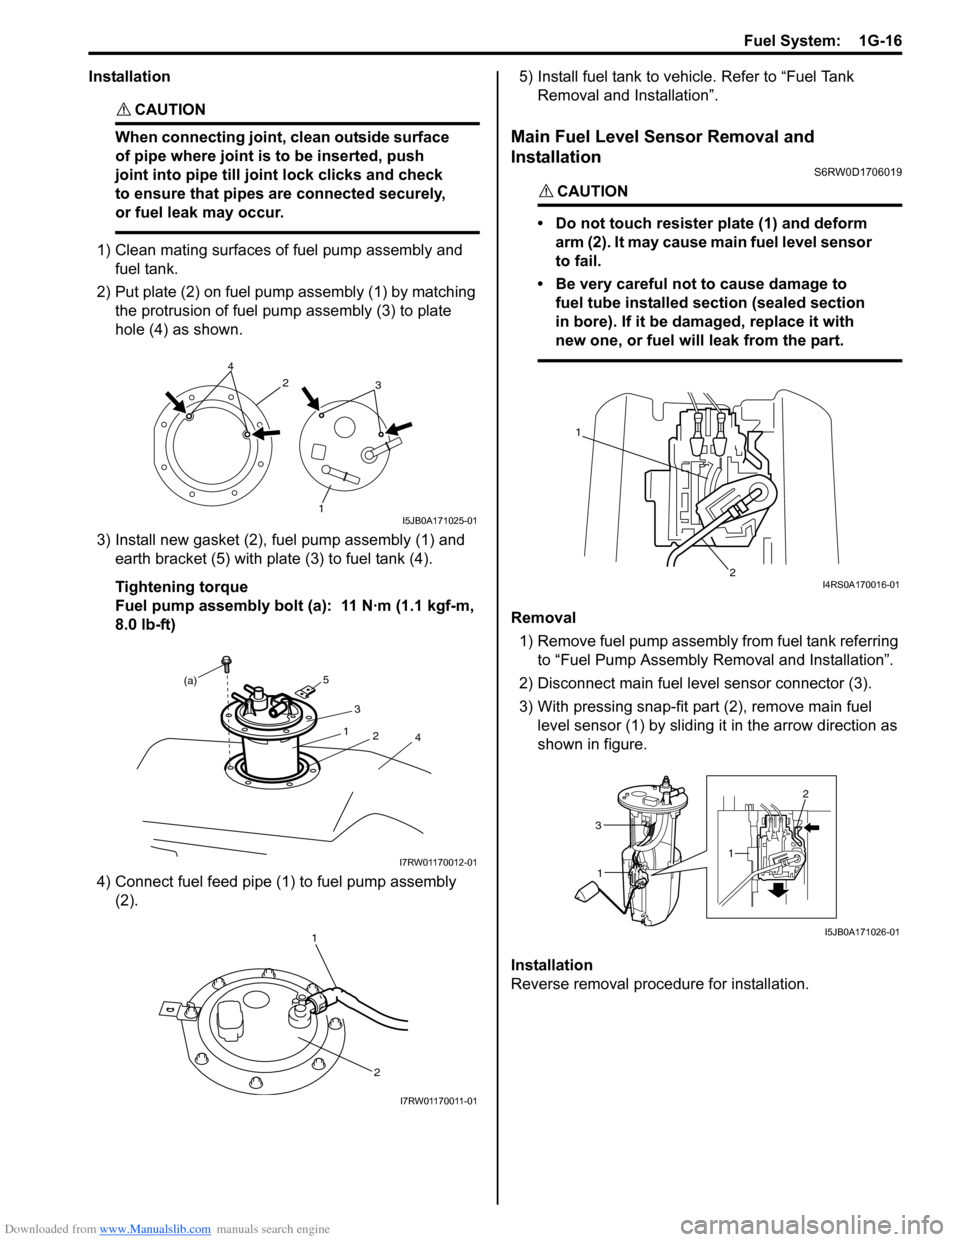 SUZUKI SX4 2006 1.G Service Workshop Manual Downloaded from www.Manualslib.com manuals search engine Fuel System:  1G-16
Installation
CAUTION! 
When connecting joint, clean outside surface 
of pipe where joint is to be inserted, push 
joint int